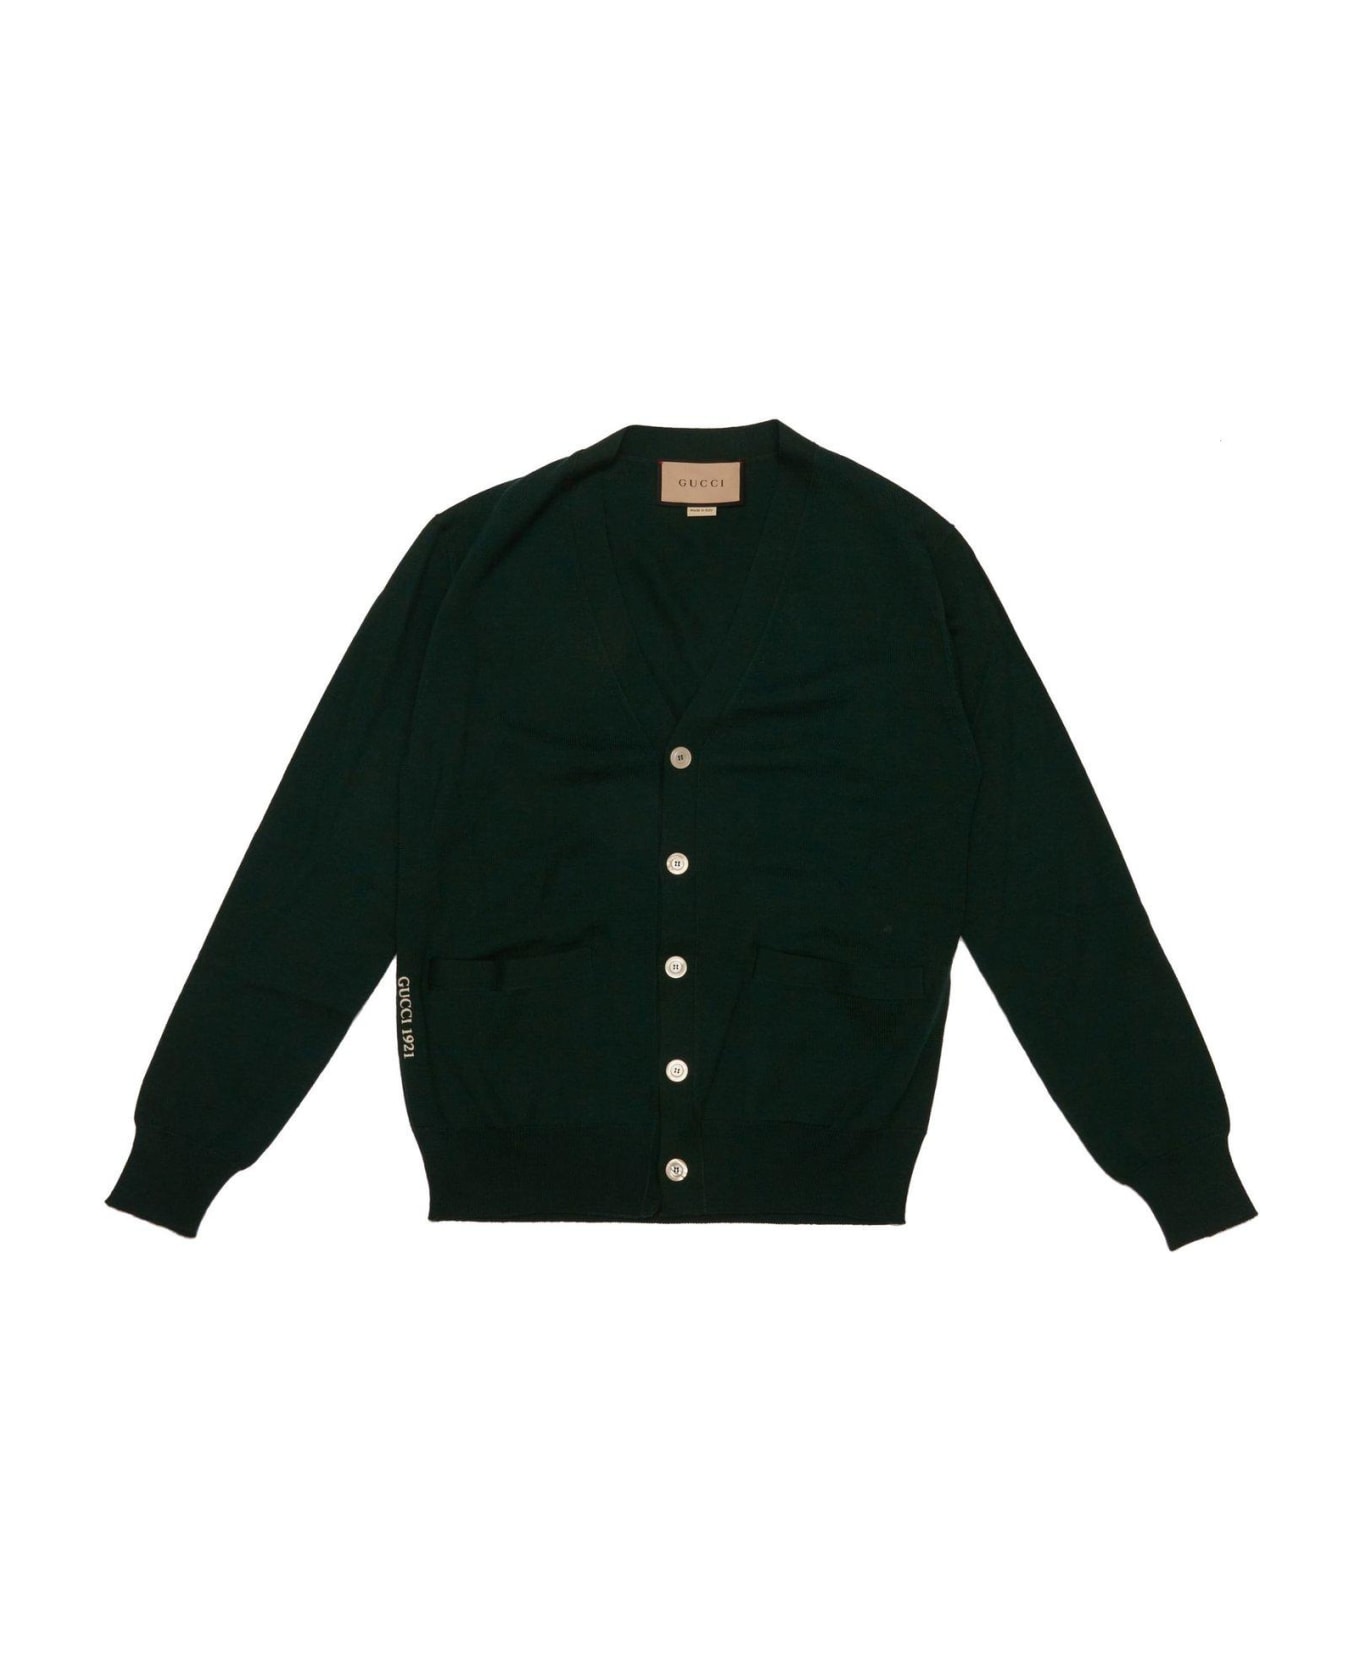 Gucci Logo Embroidered Cardigan - Green Forest Ivory